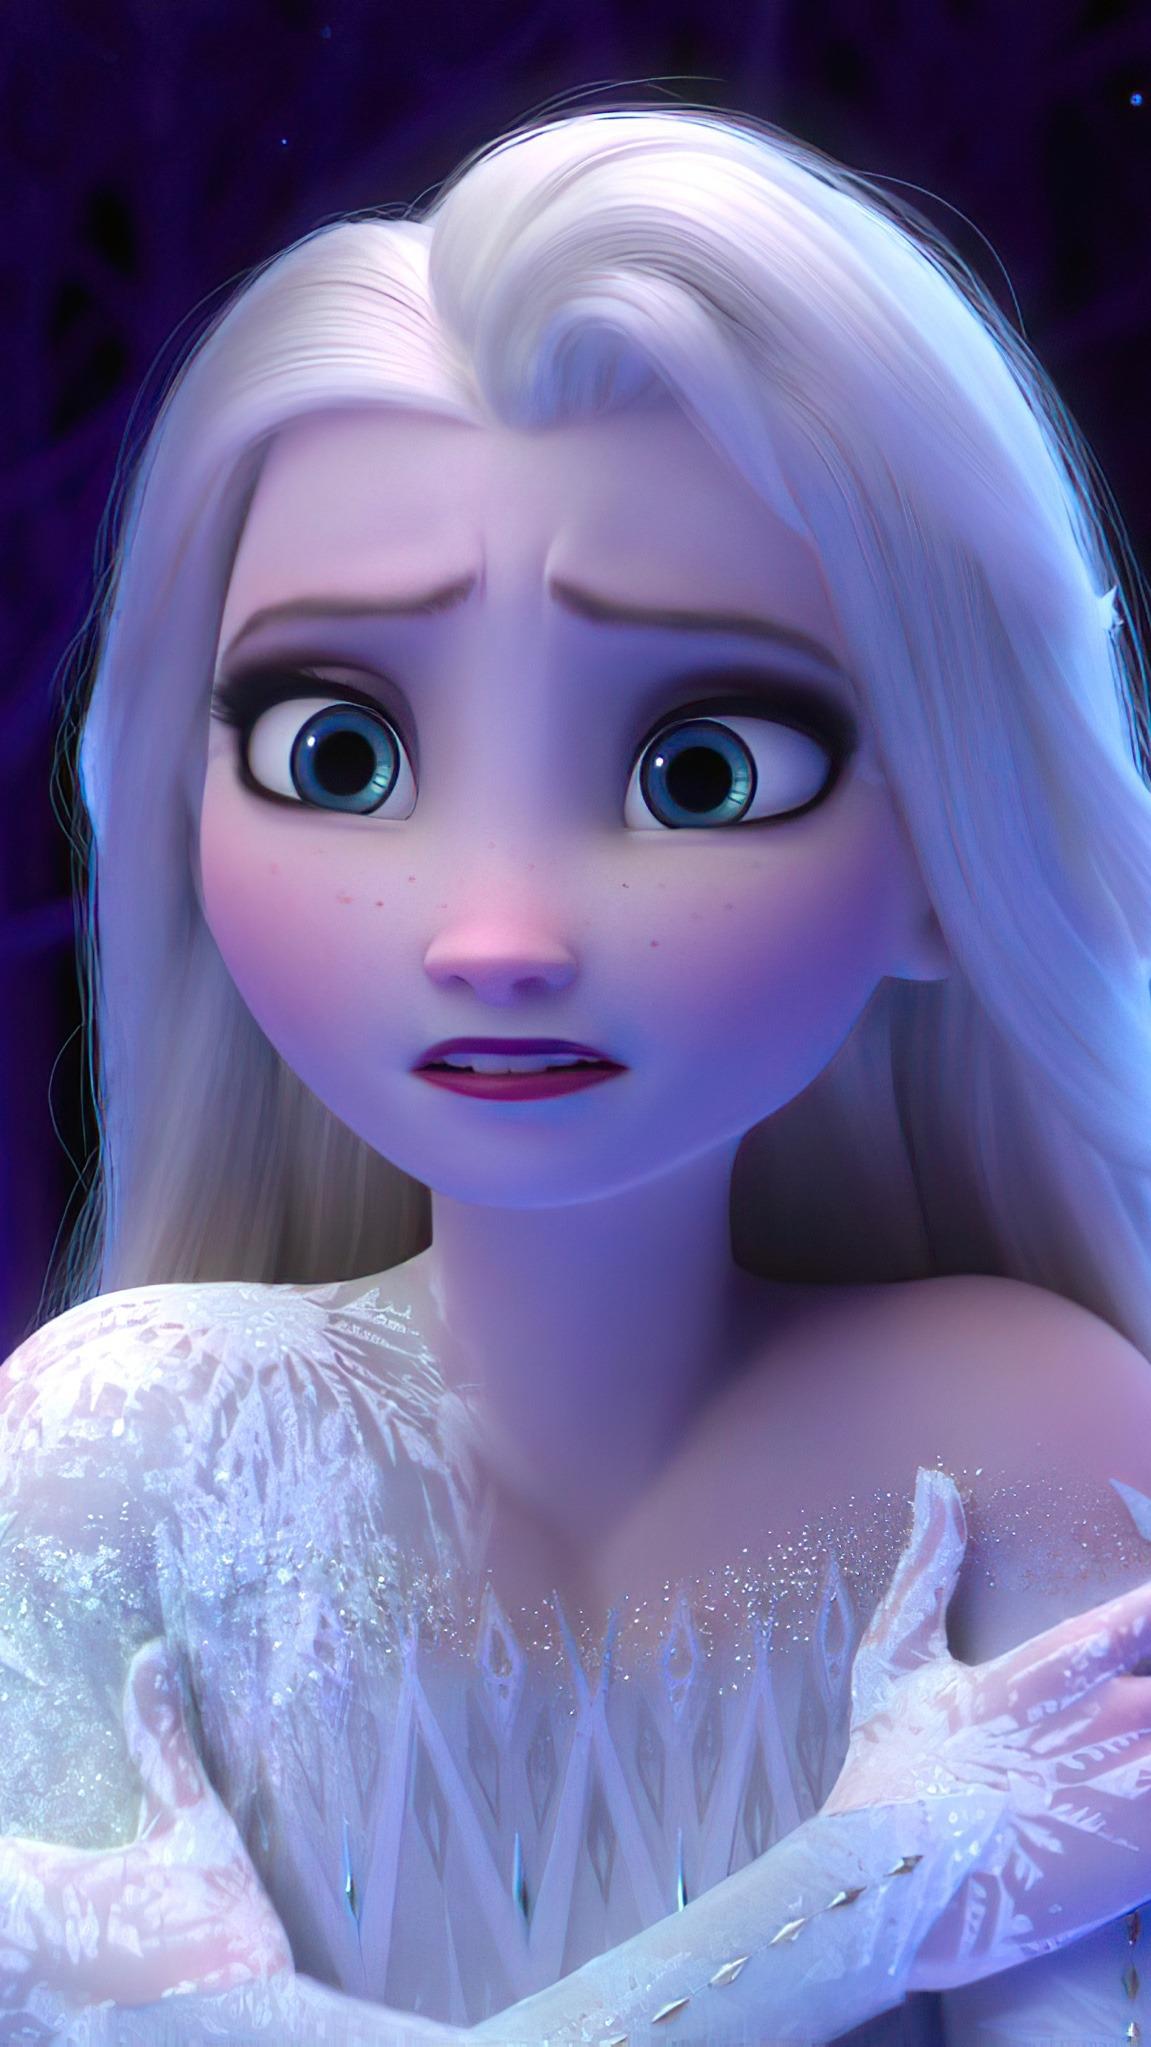 The Prettiest Elsa Pic I've Ever Seen. Probably. Credit To Constable Frozen On Tumblr Blog Is Full Of Stuff Like This!